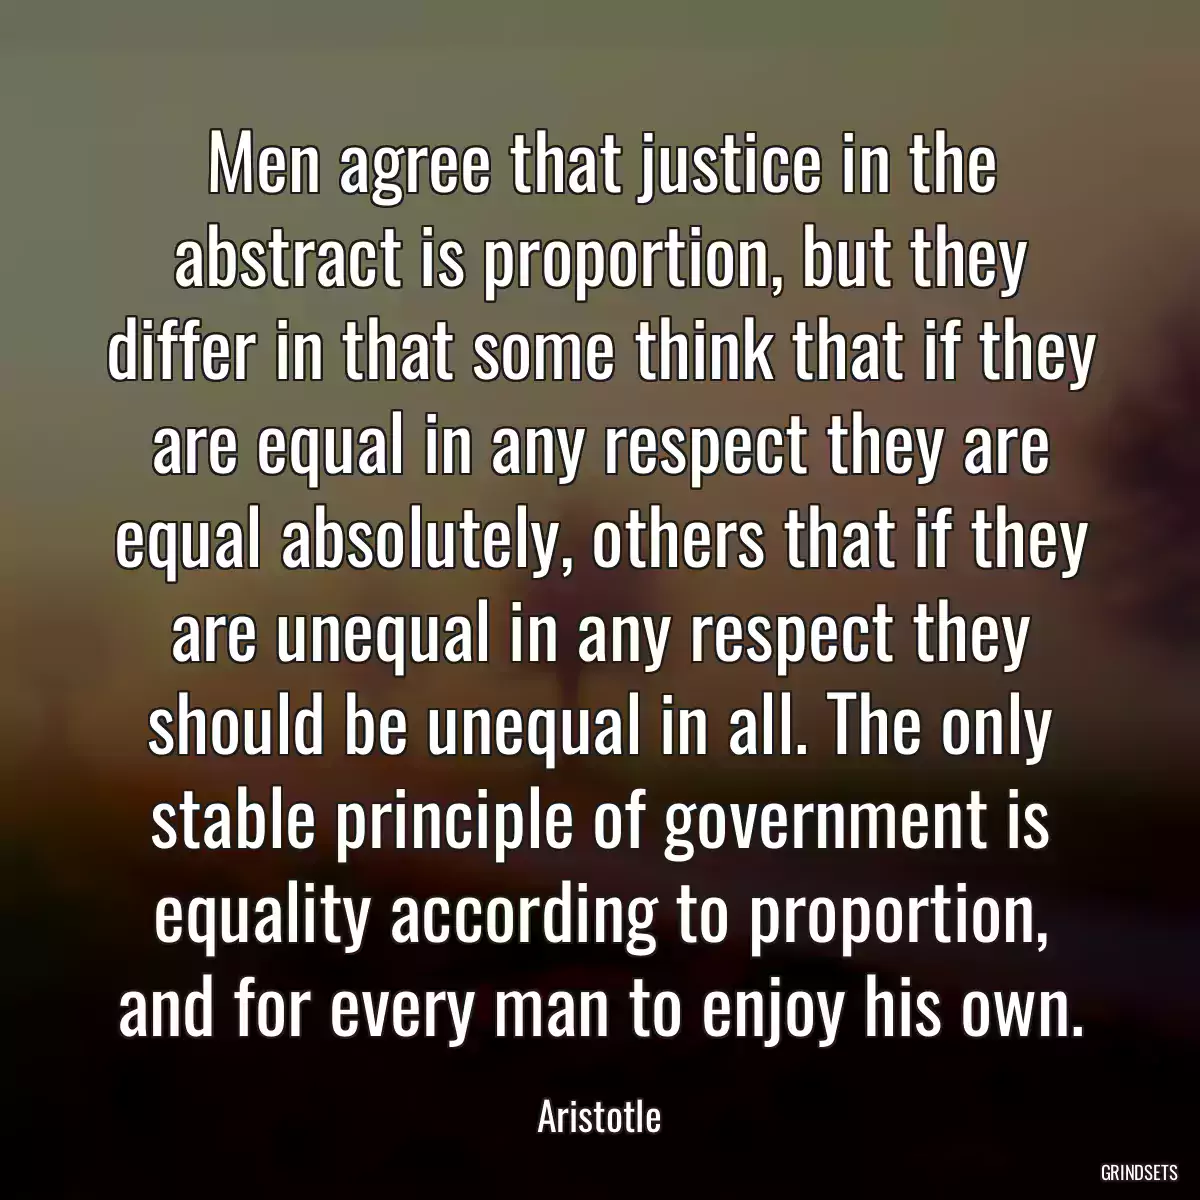 Men agree that justice in the abstract is proportion, but they differ in that some think that if they are equal in any respect they are equal absolutely, others that if they are unequal in any respect they should be unequal in all. The only stable principle of government is equality according to proportion, and for every man to enjoy his own.